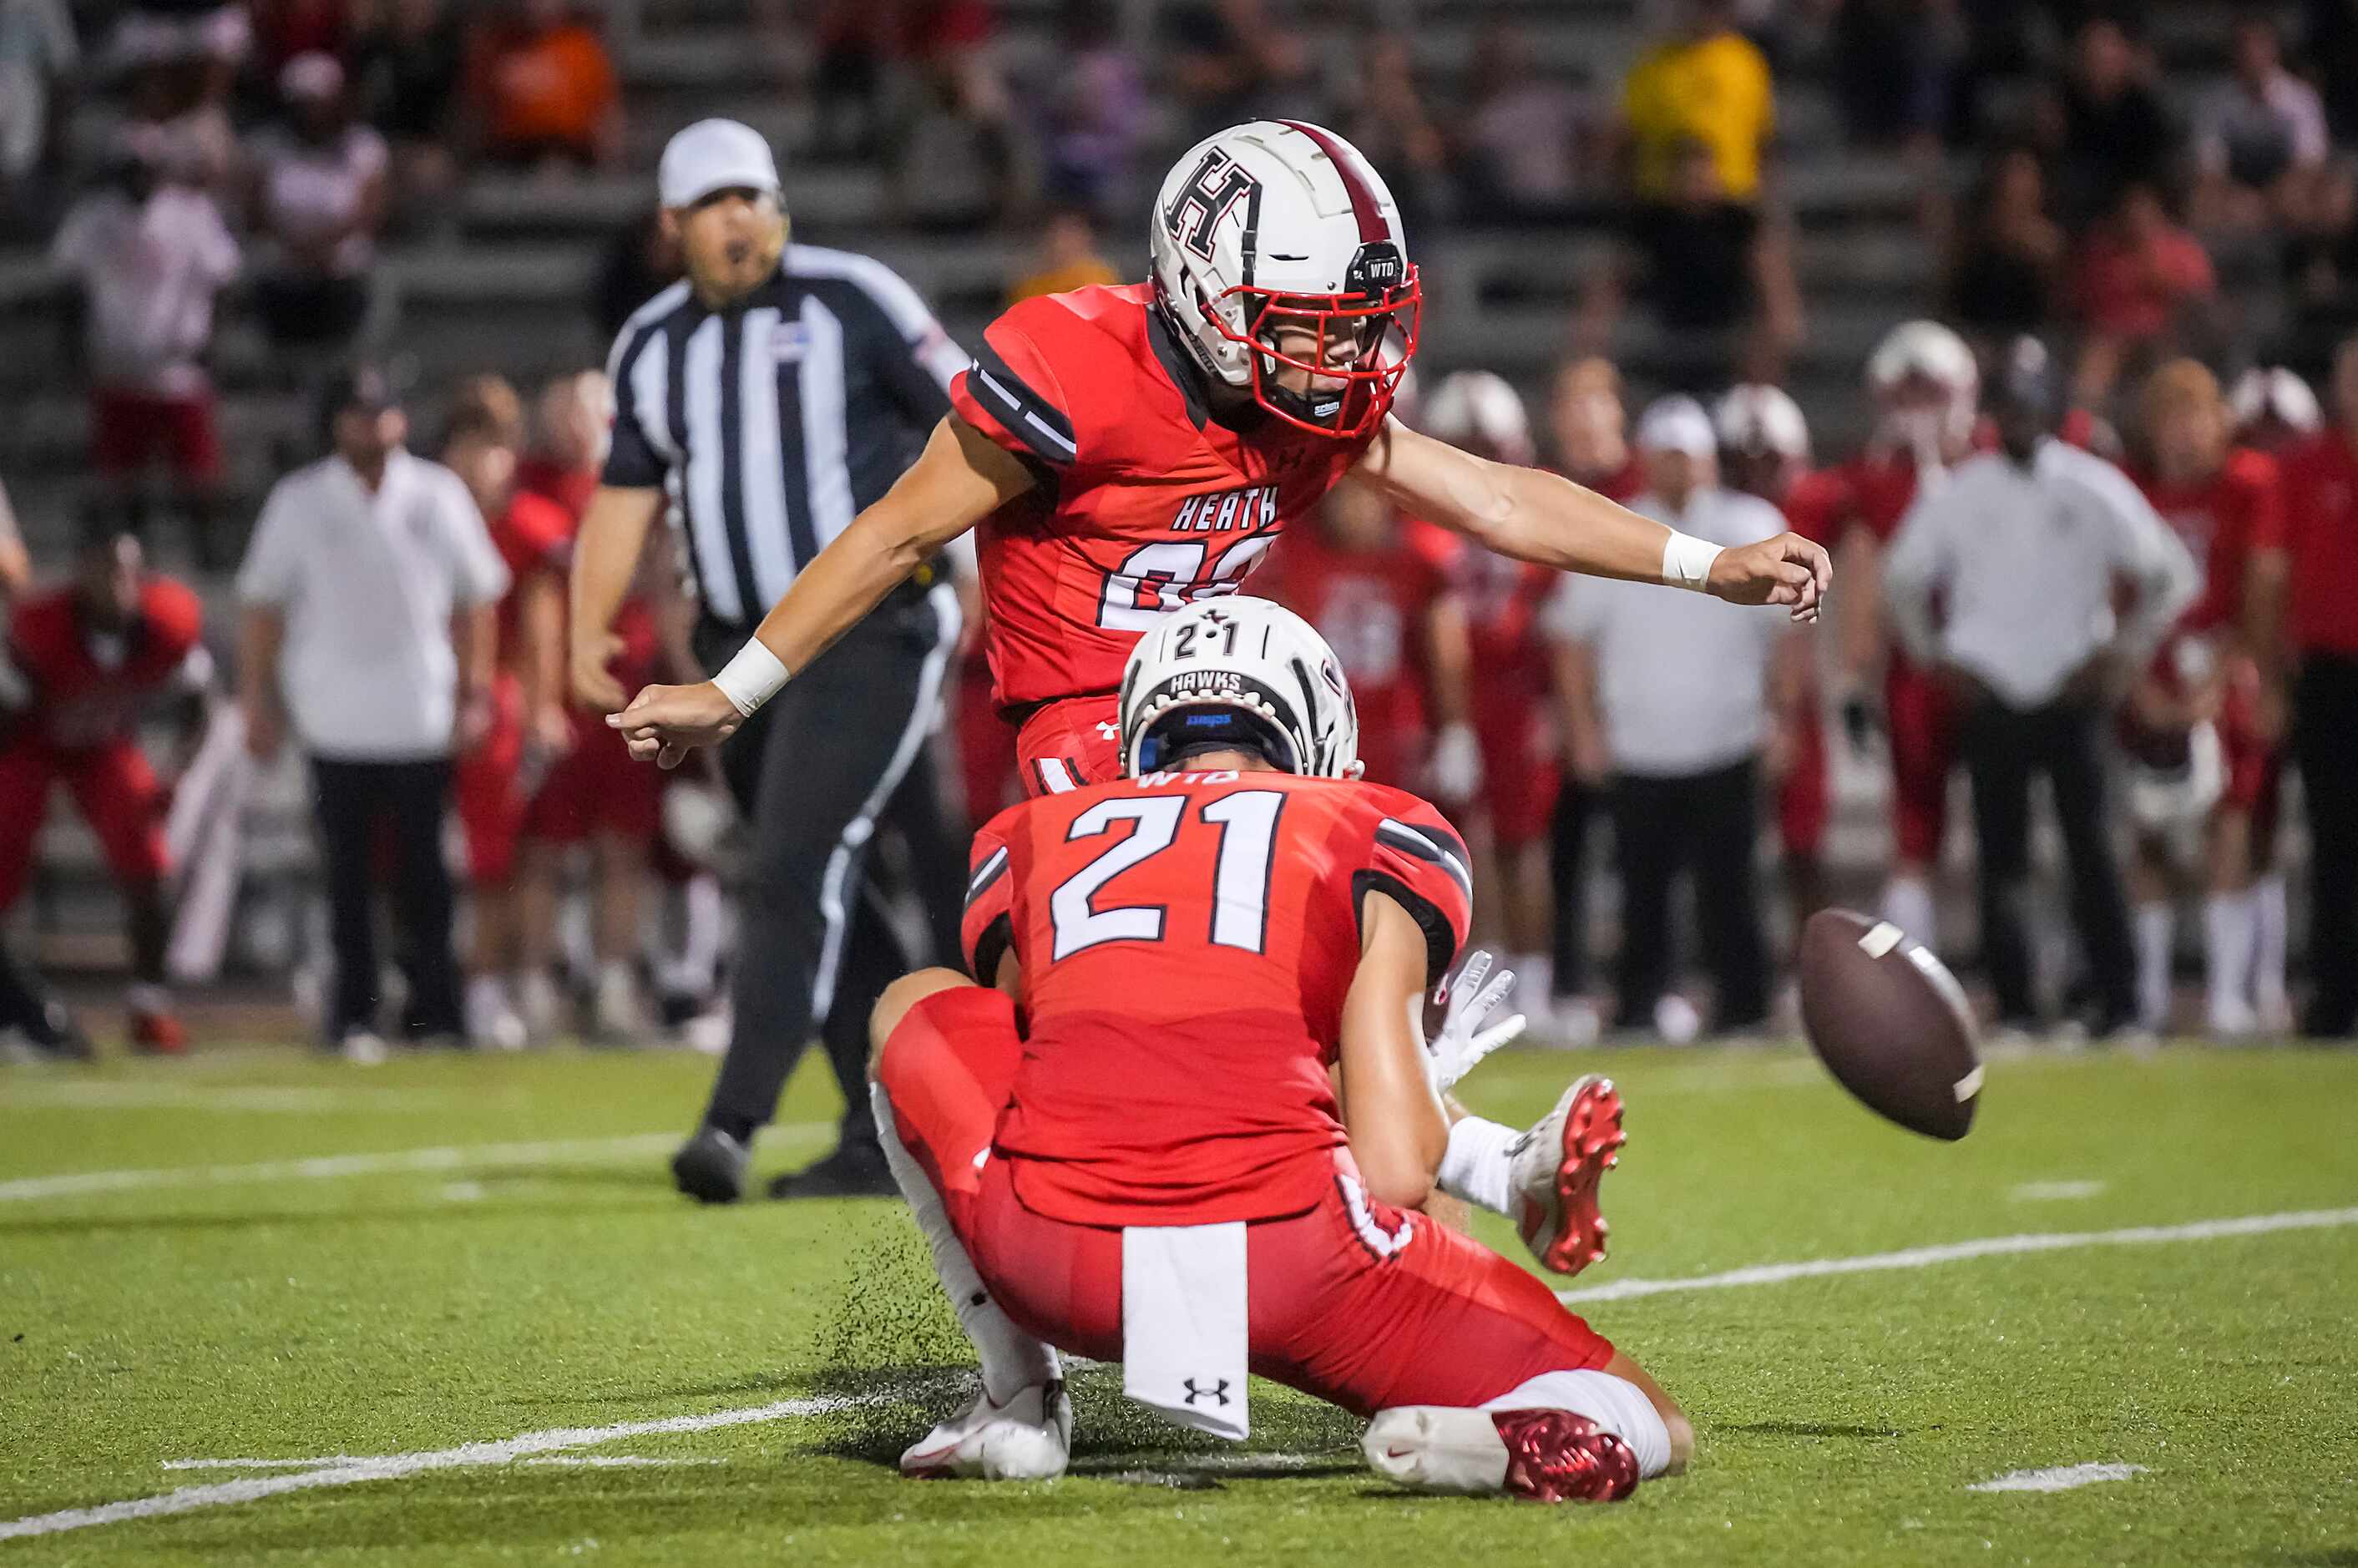 Rockwall-Heath kicker Sam Spencer (82) misses on a 26-yard field goal attempt from the hold...